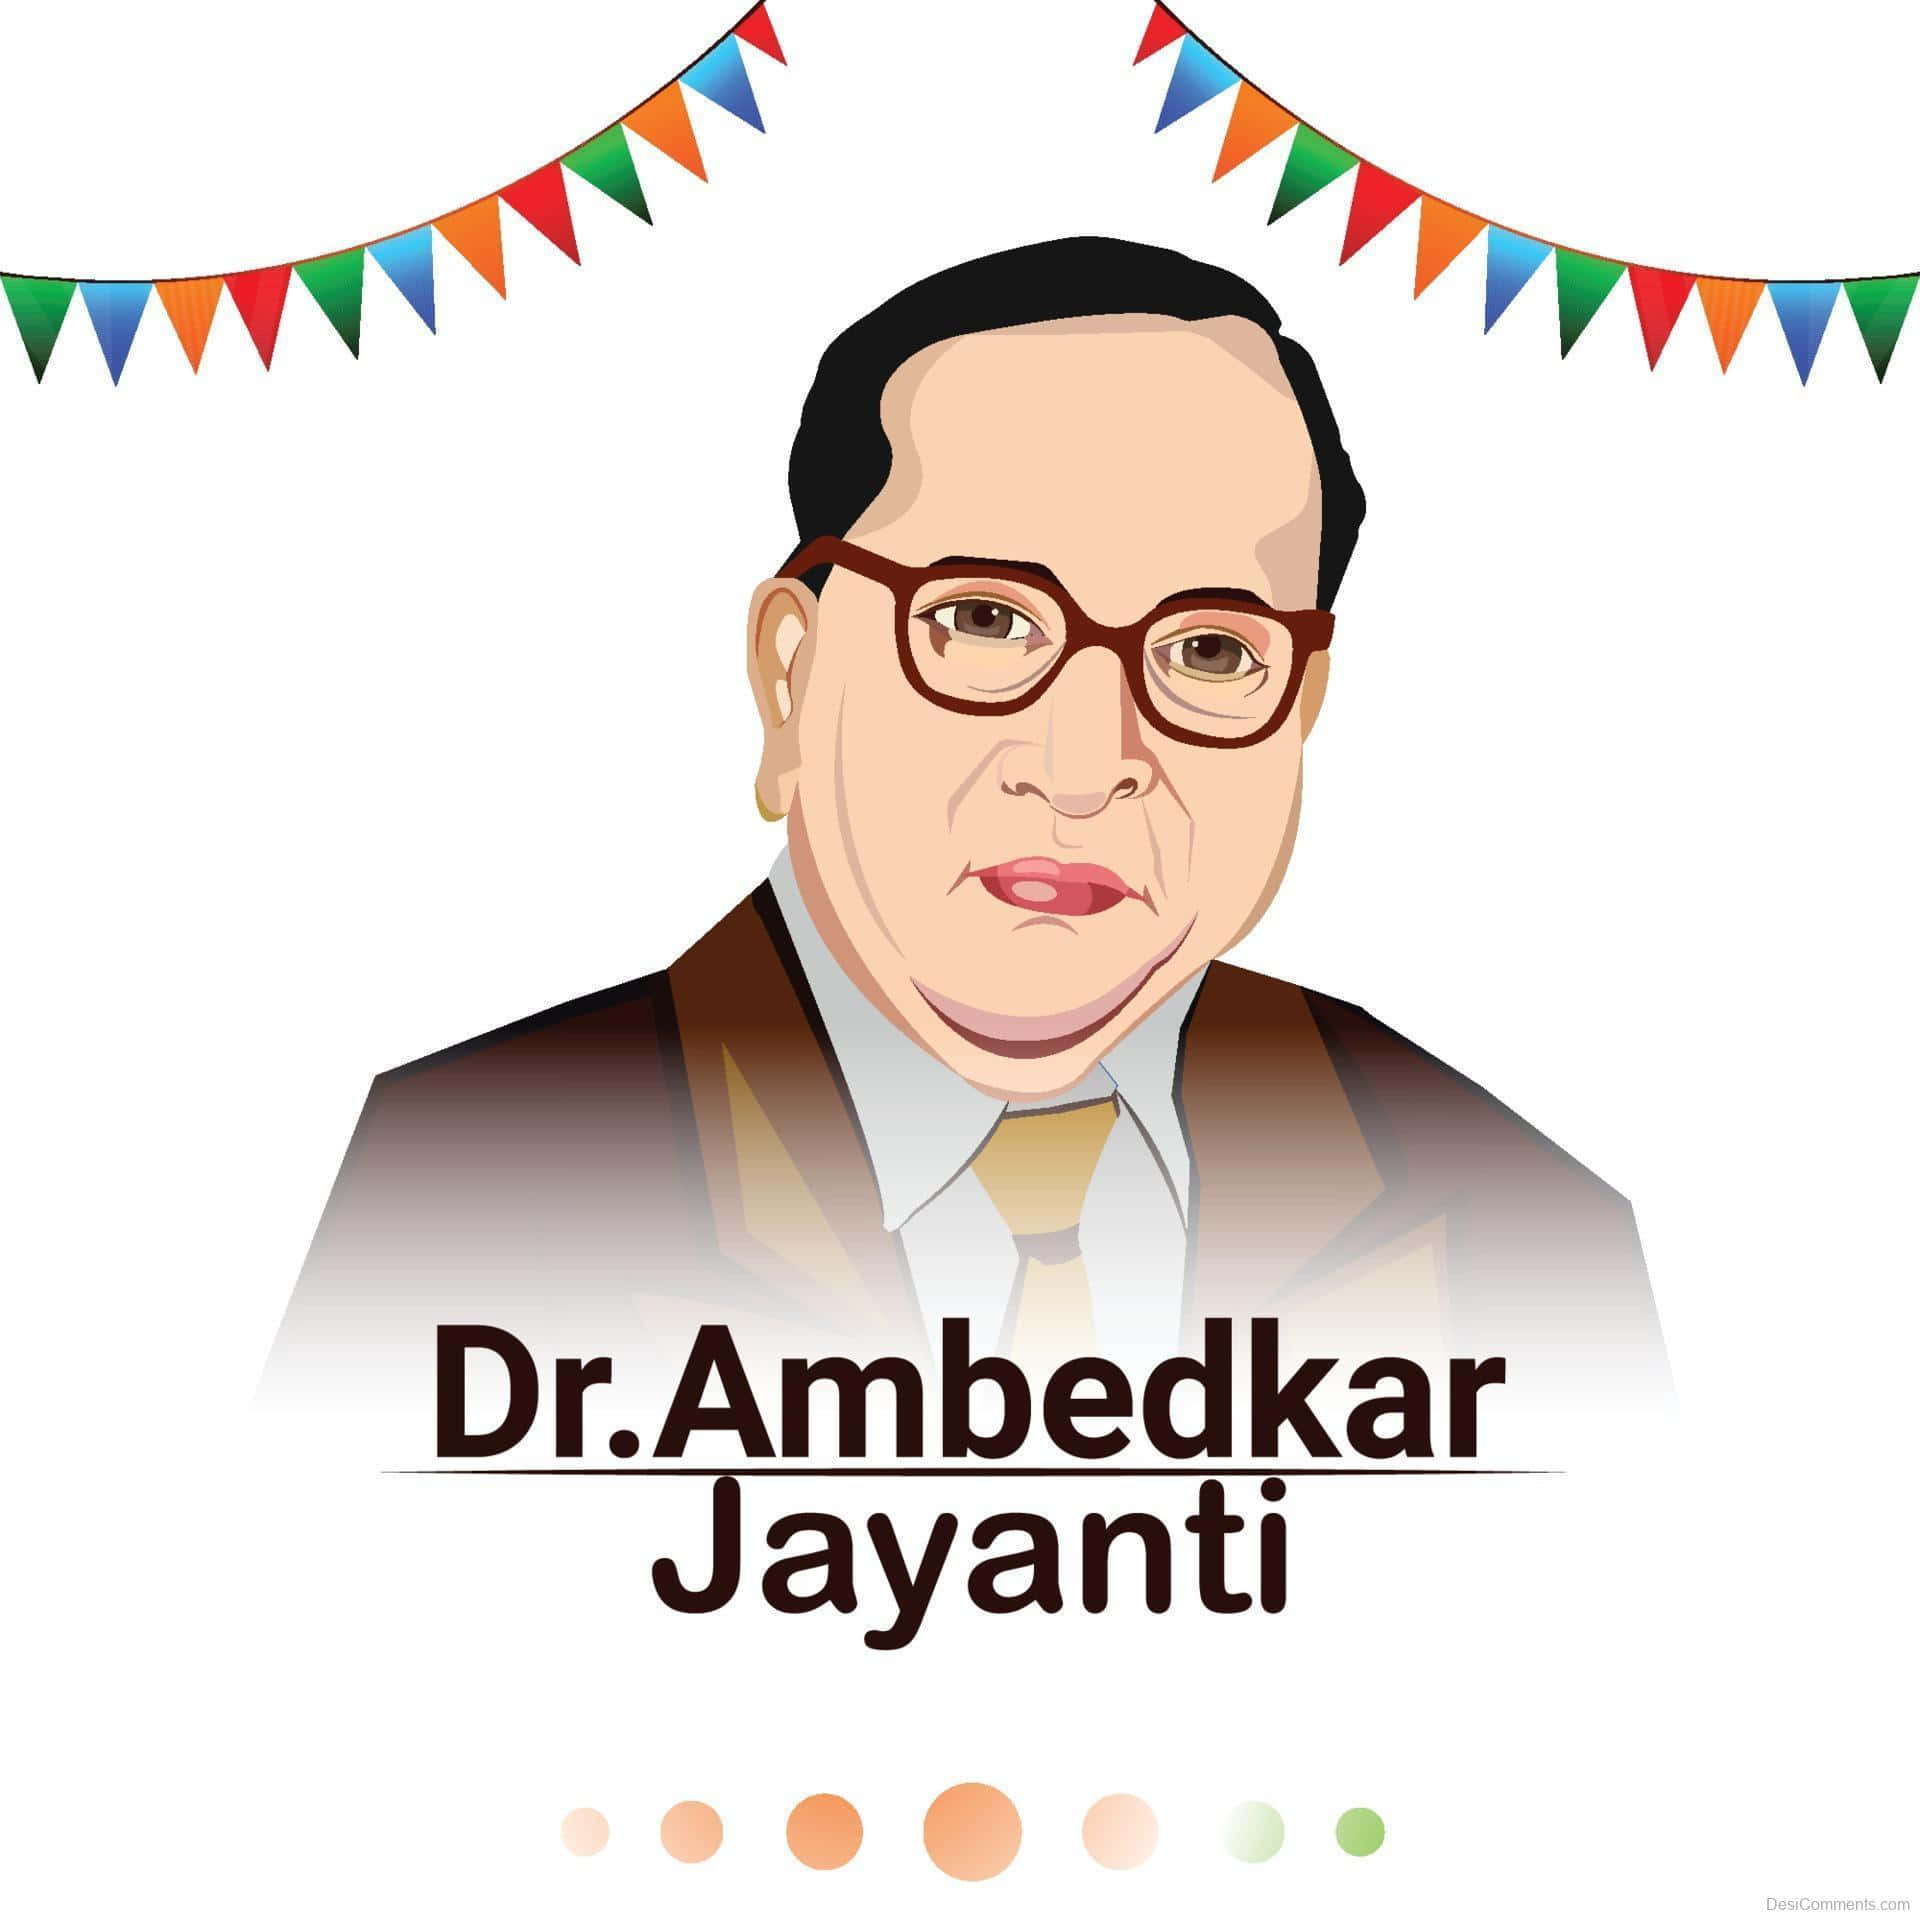 Dr. Ambedkar - Architect of Indian Constitution